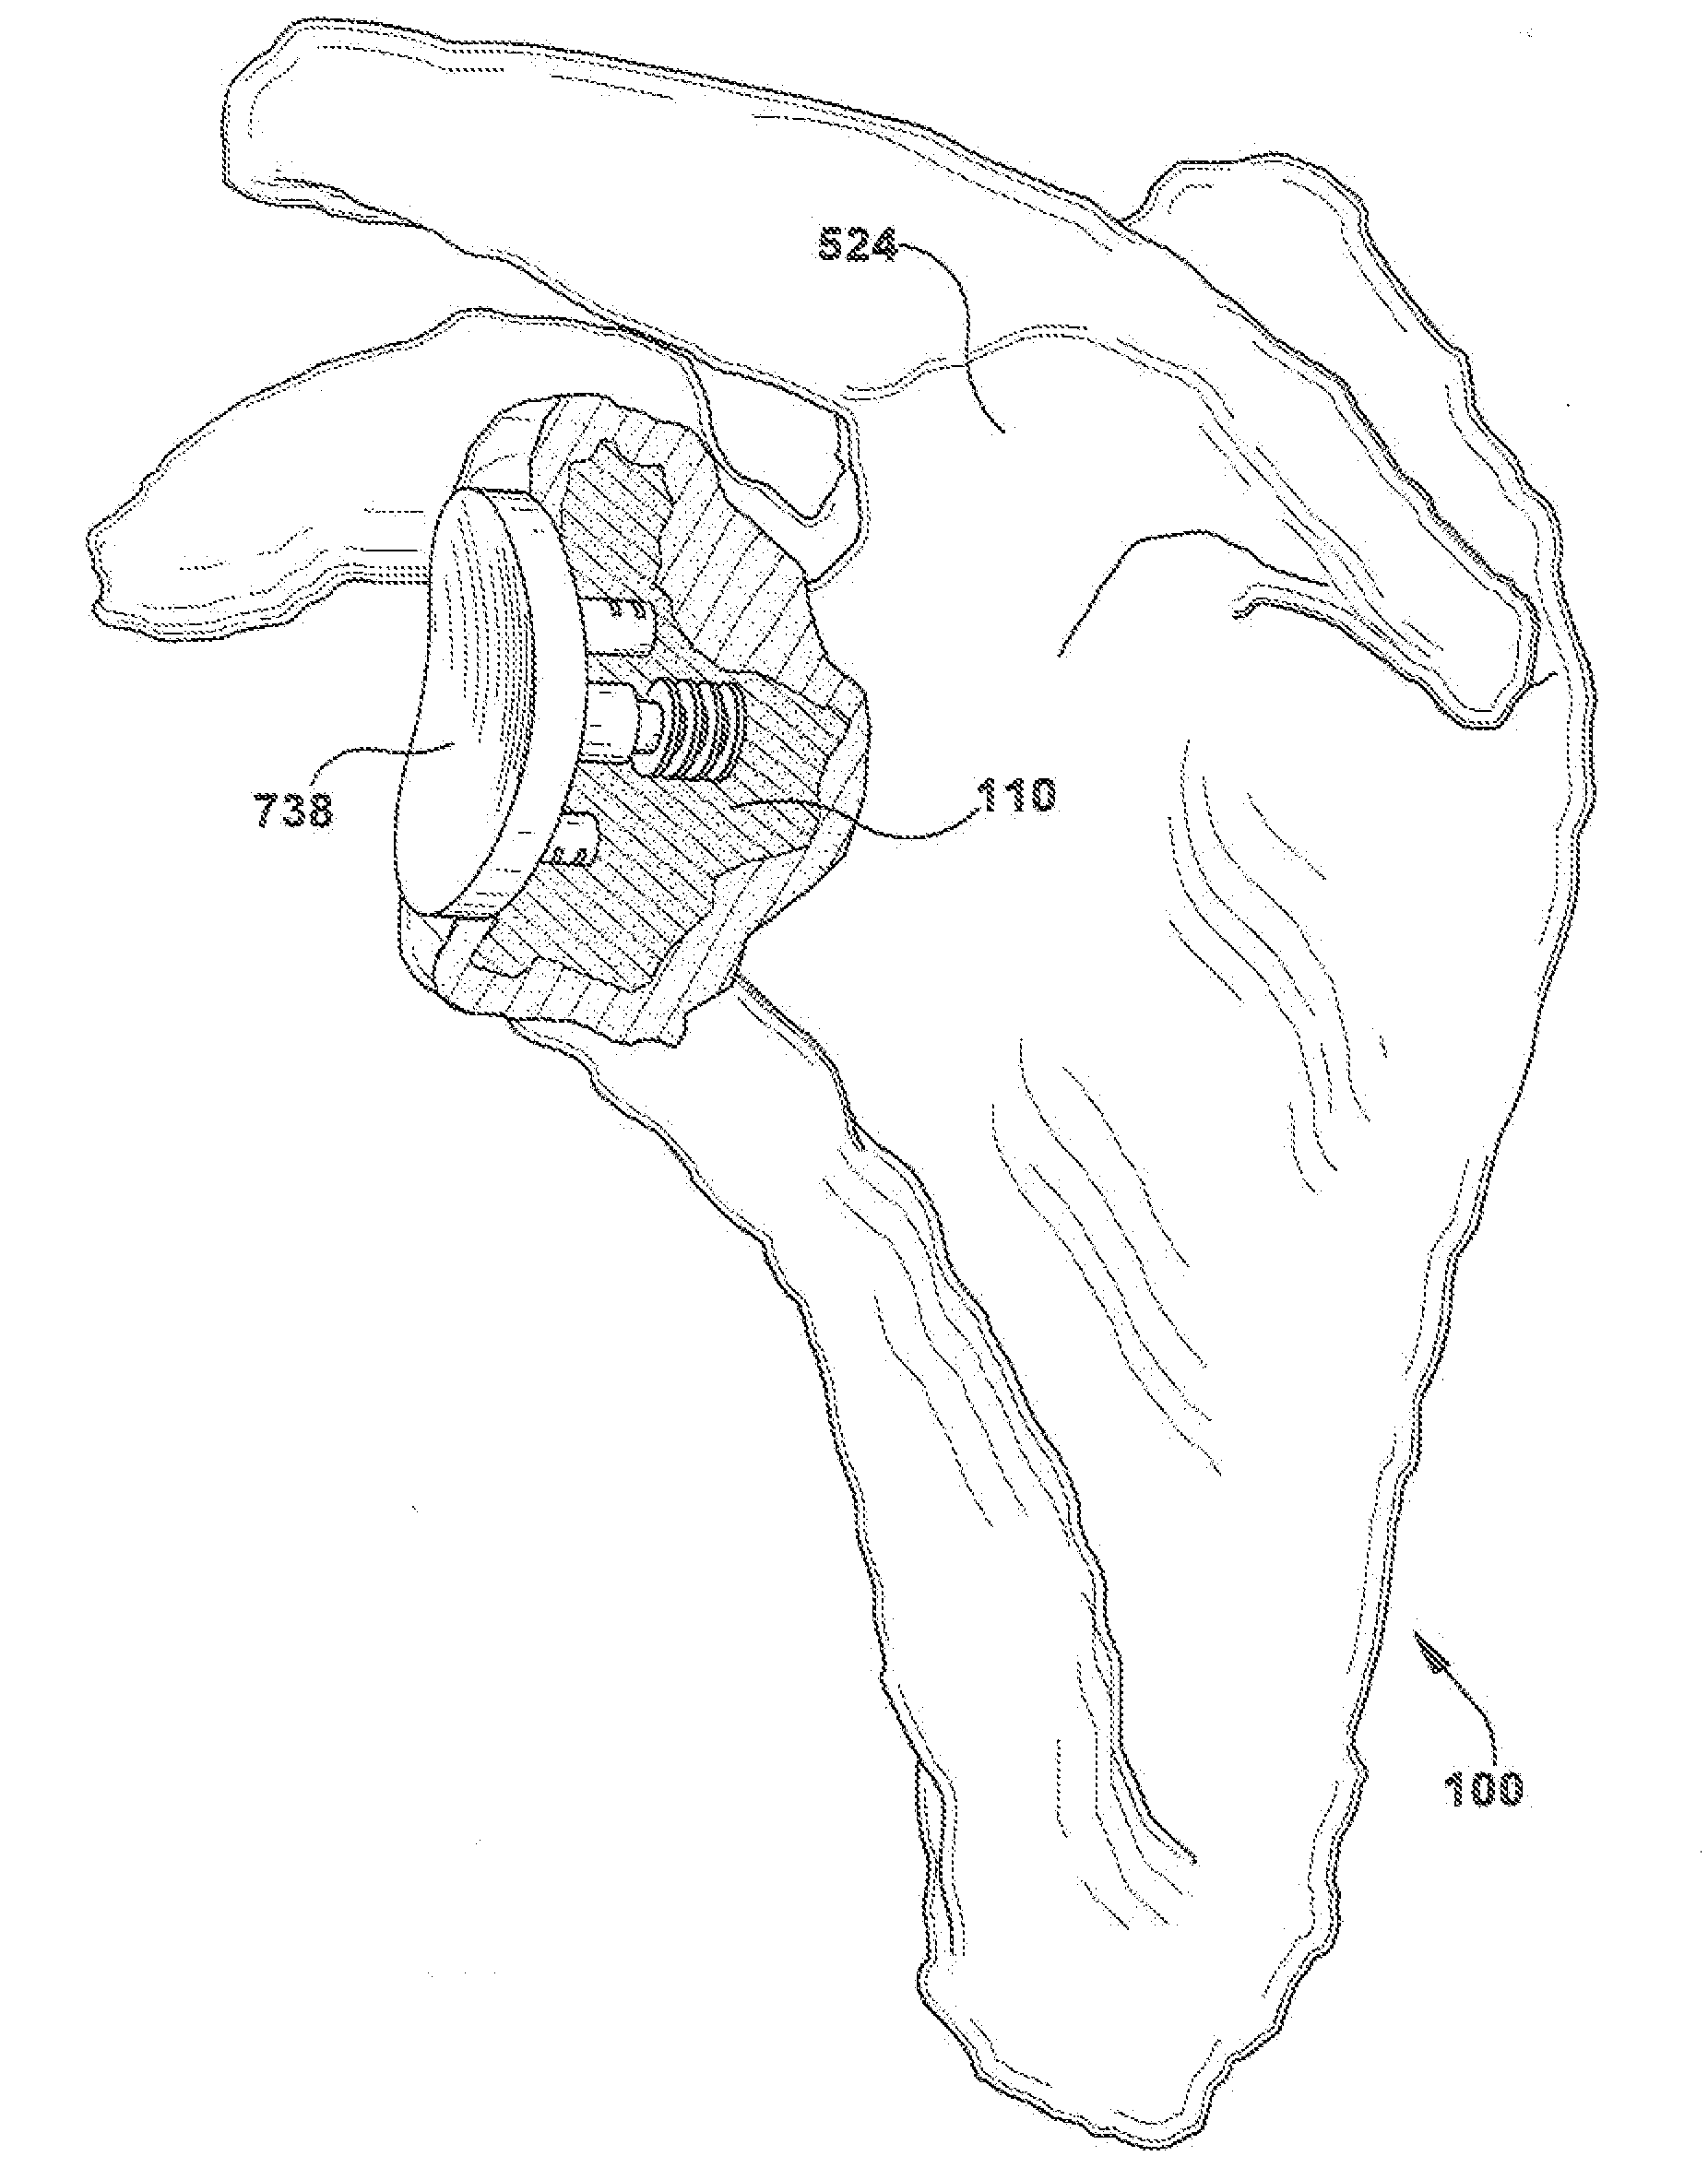 Method and apparatus for preparing for a surgical procedure